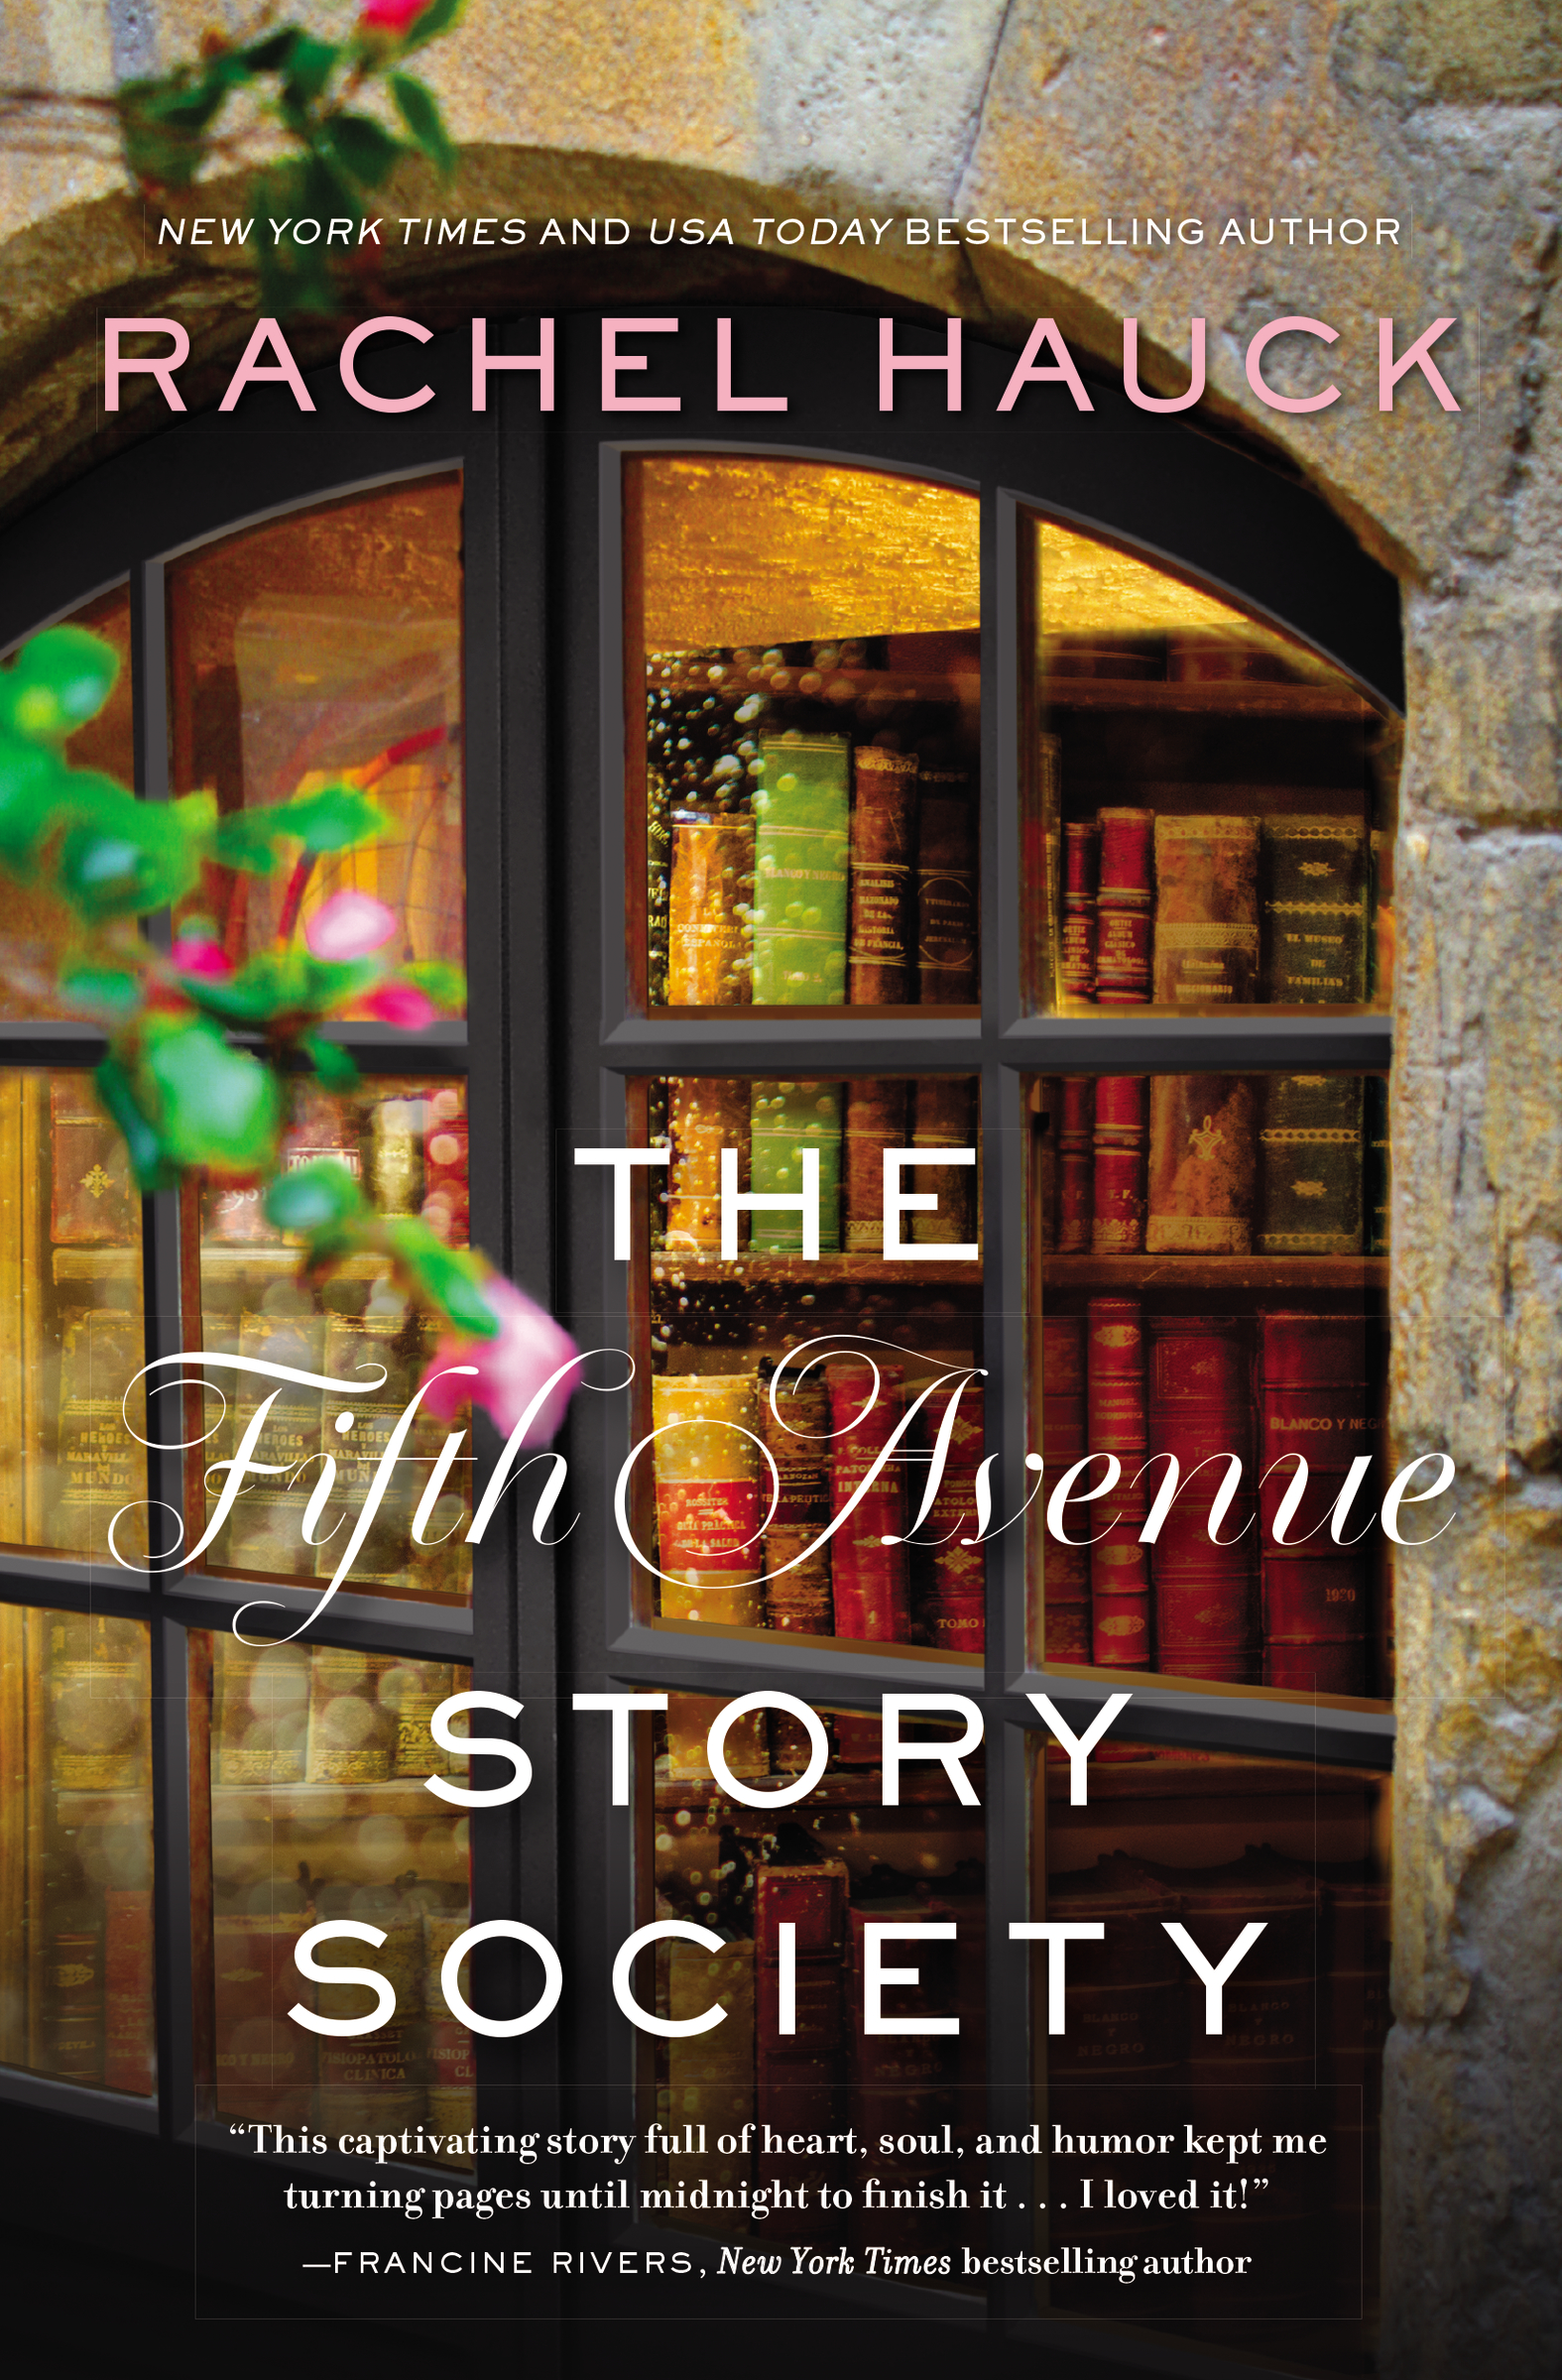 The Fifth Avenue story society cover image